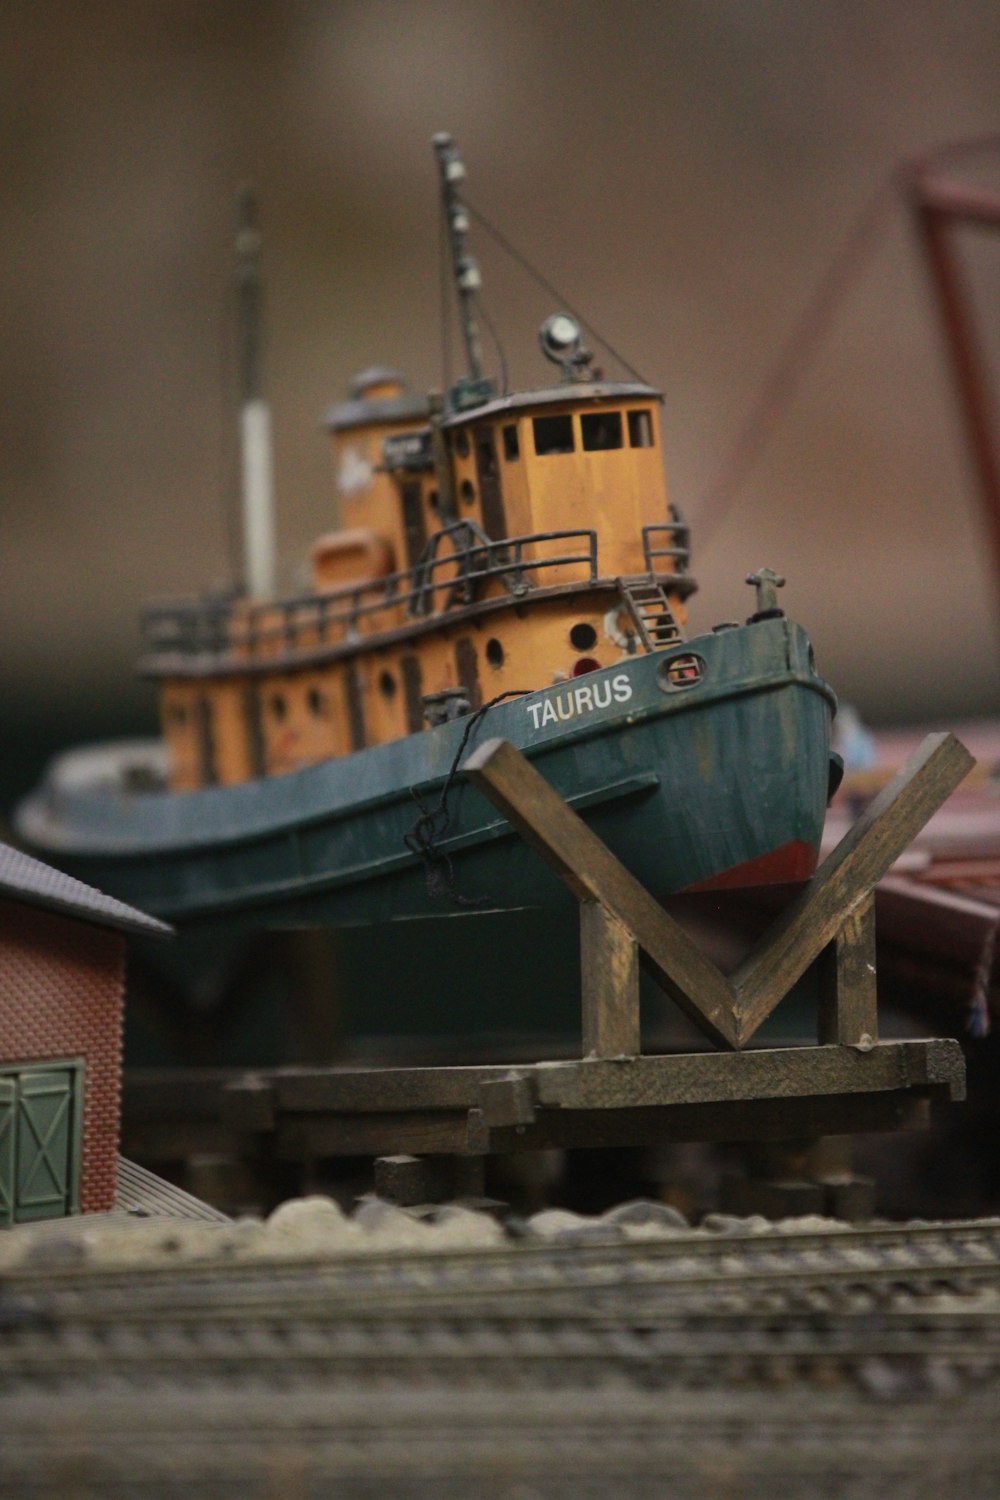 a model of a tug boat on a train track